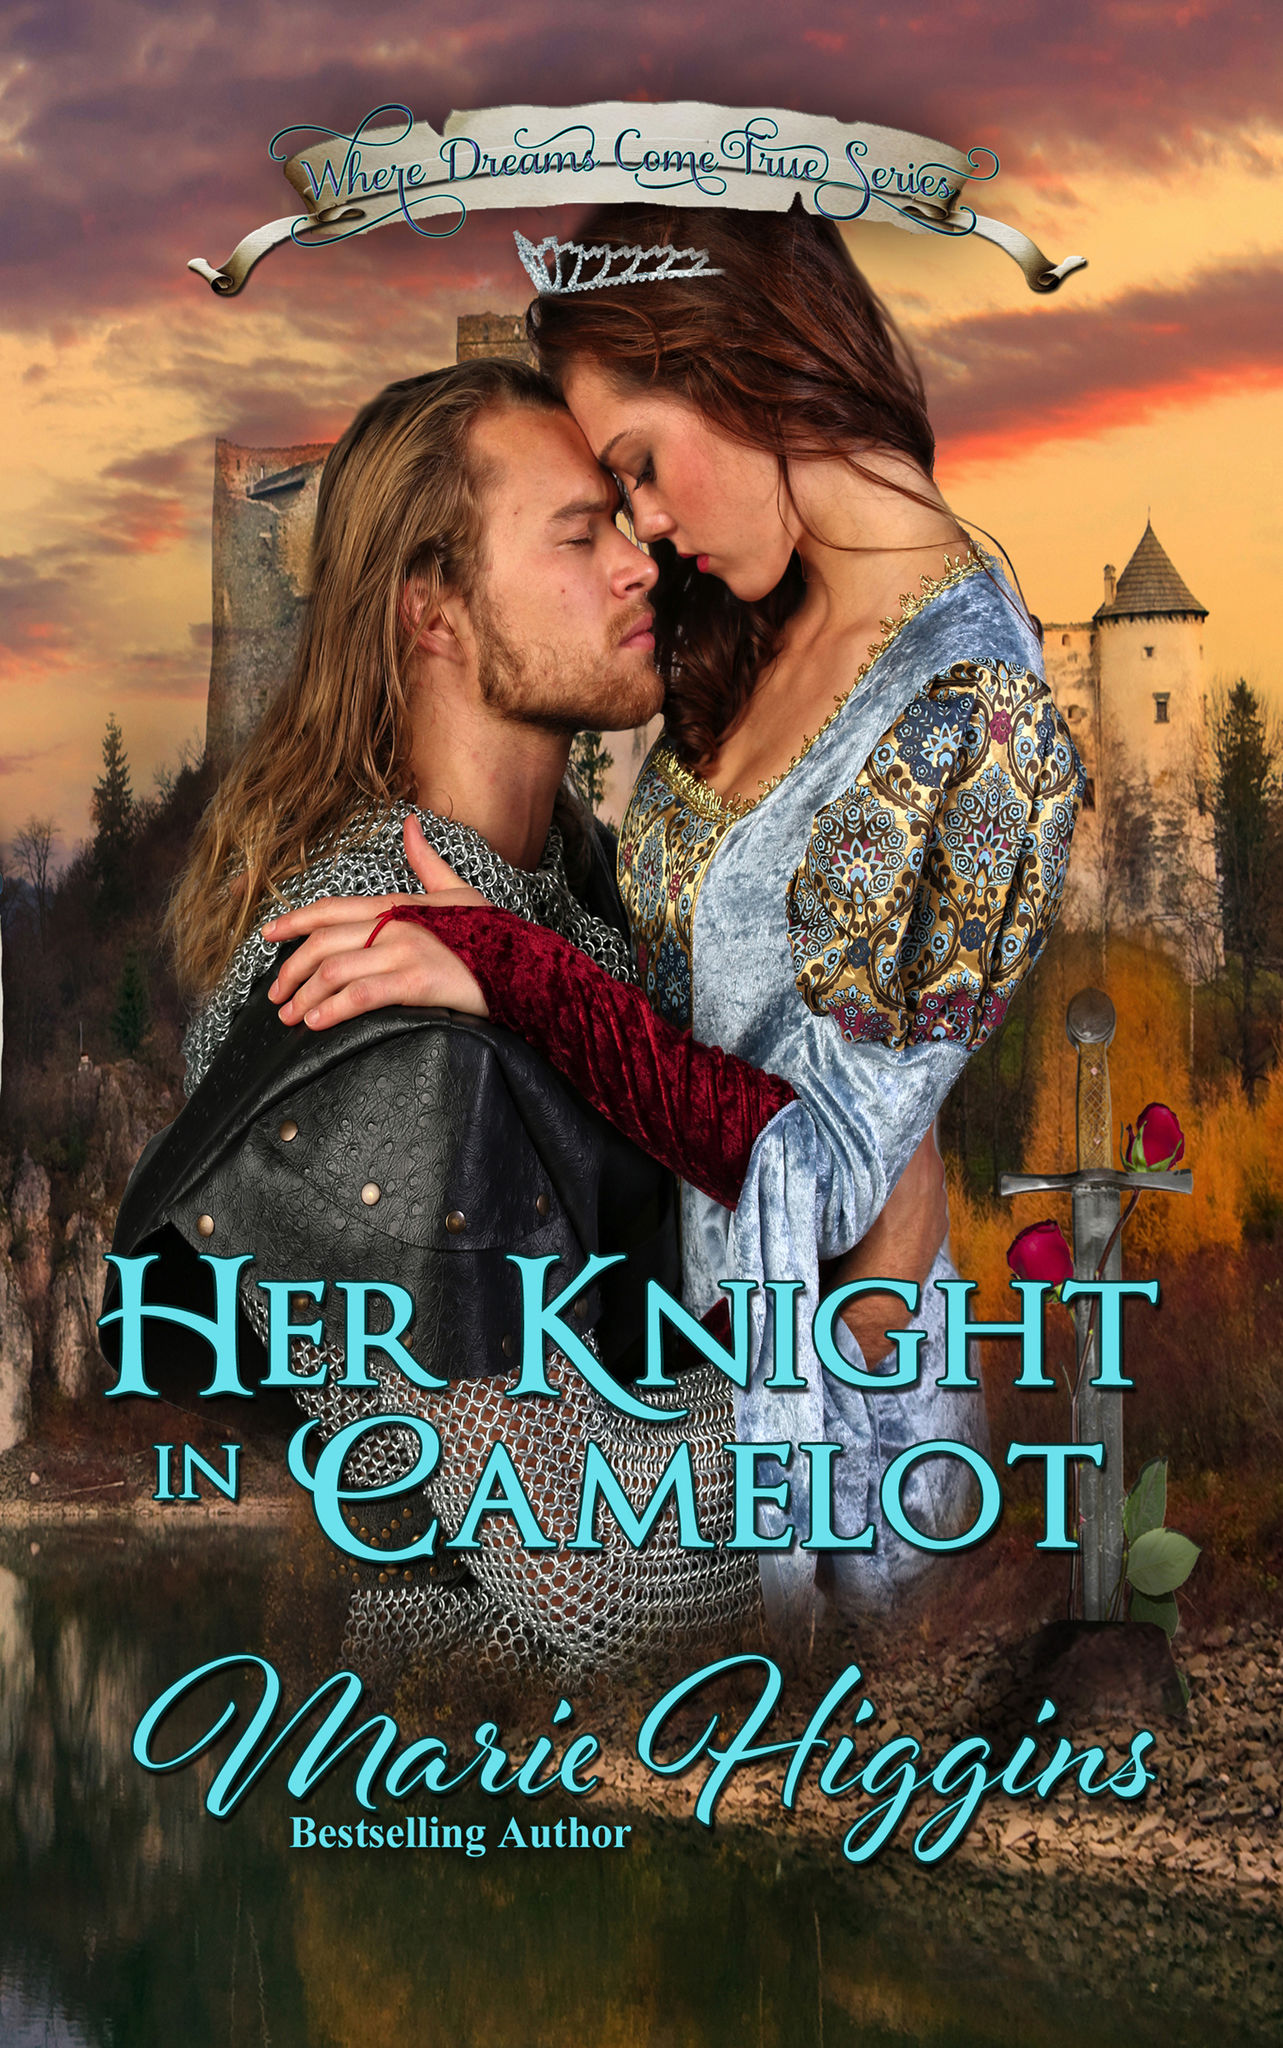 HER KNIGHT IN CAMELOT